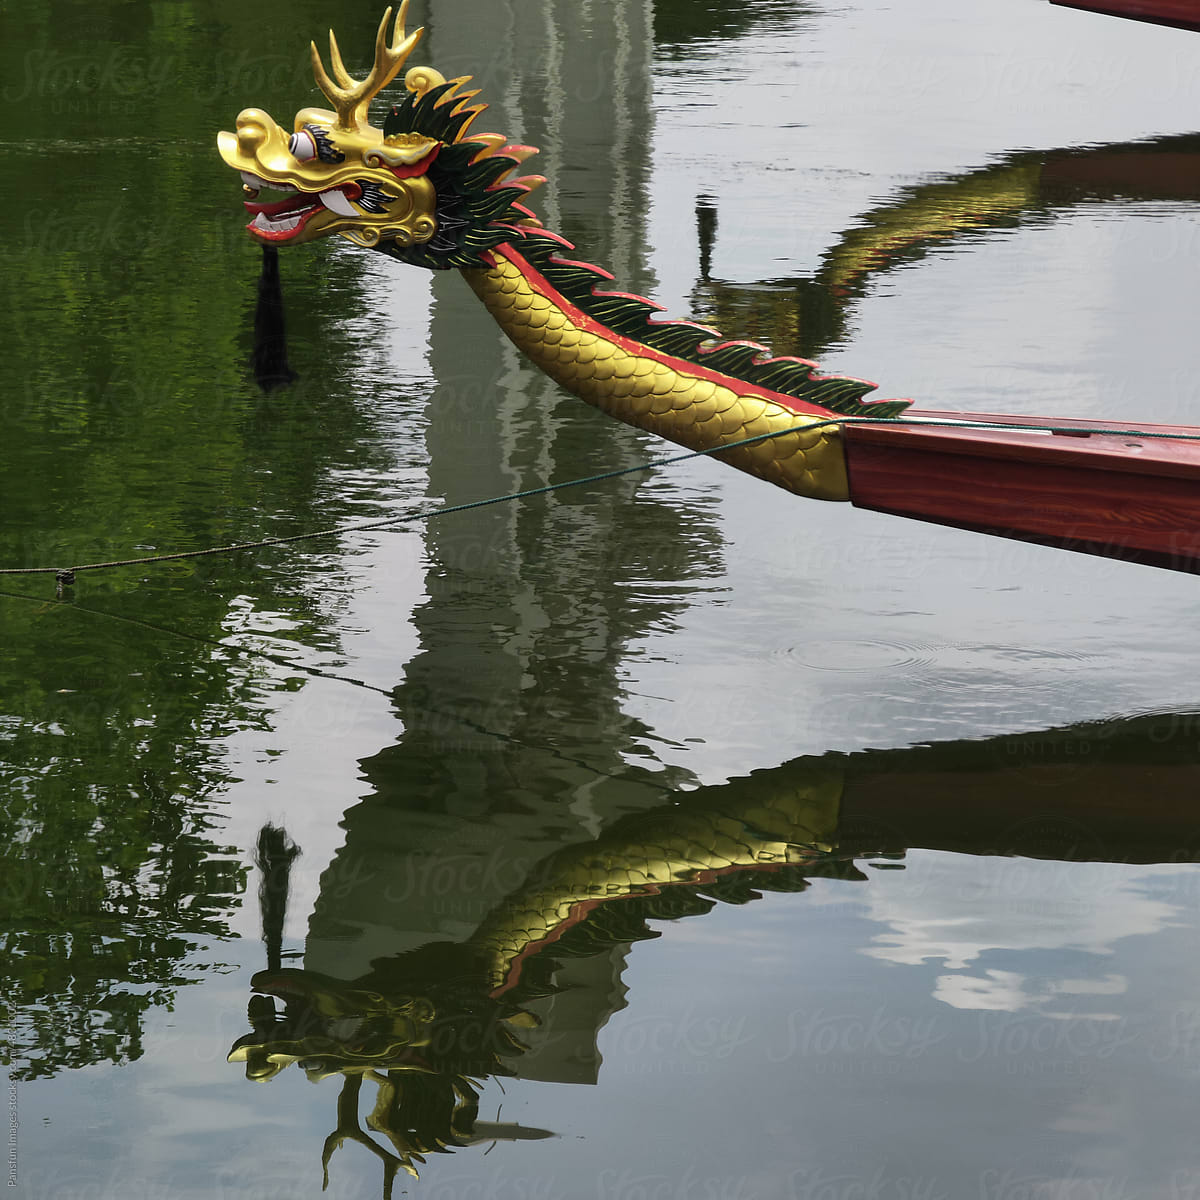 Chinese traditional dragon boat